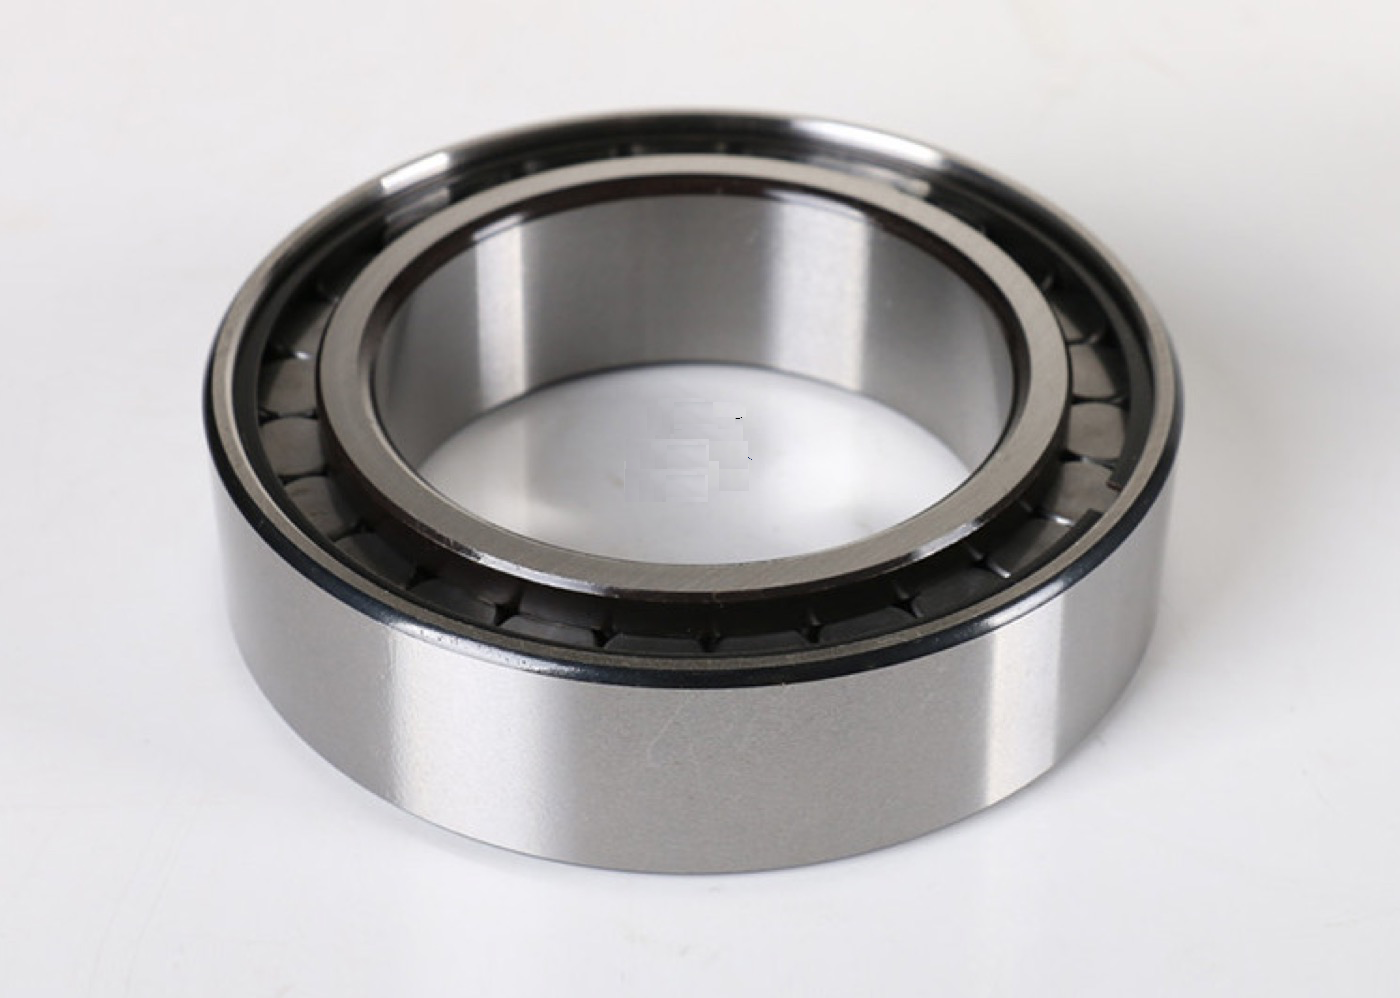 SL014956 GENERIC 280x380x100 Full compliment metric cylindrical roller bearing  Thumbnail